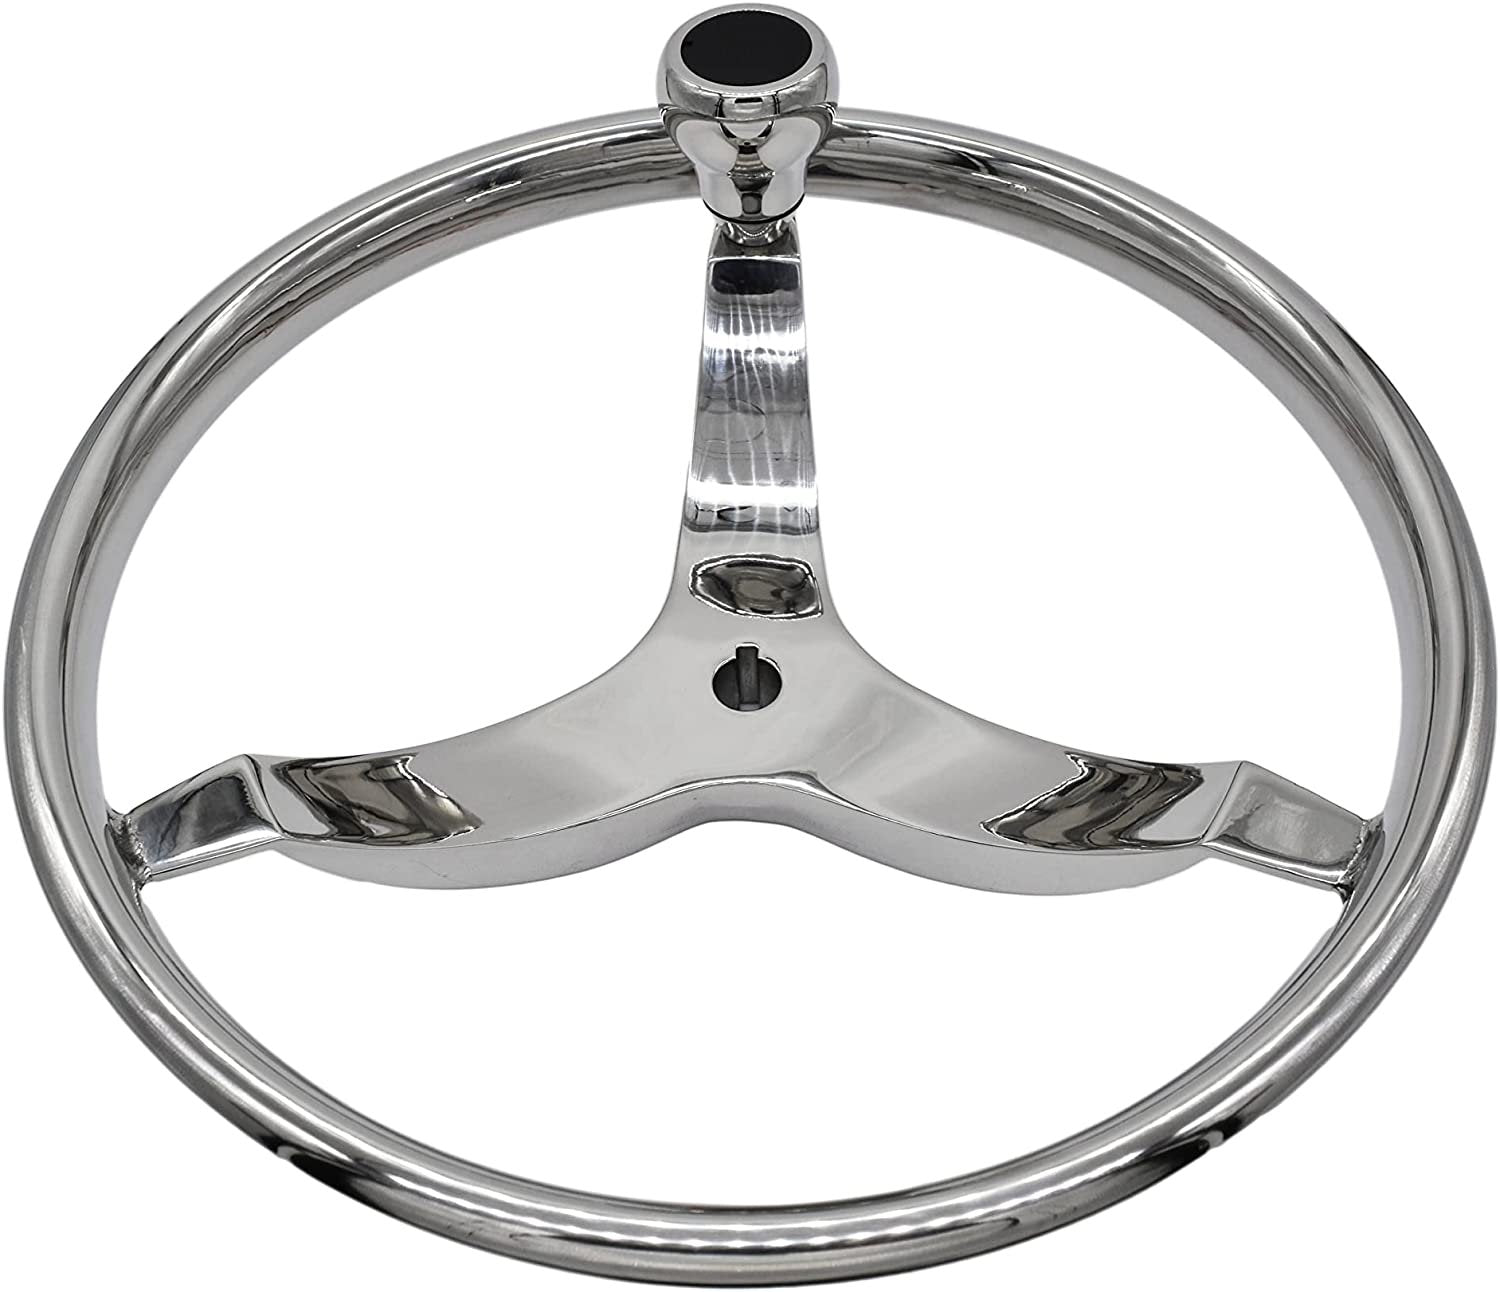 MARINE CITY 304 Grade Stainless Steel 3-Spoke 13-1/2" Diameter 3/4" Shaft Sport Steering Wheel with Bearing Control Knob for Marines – Boats – Yachts – Marine Accessory Hardware (Pack of 1)